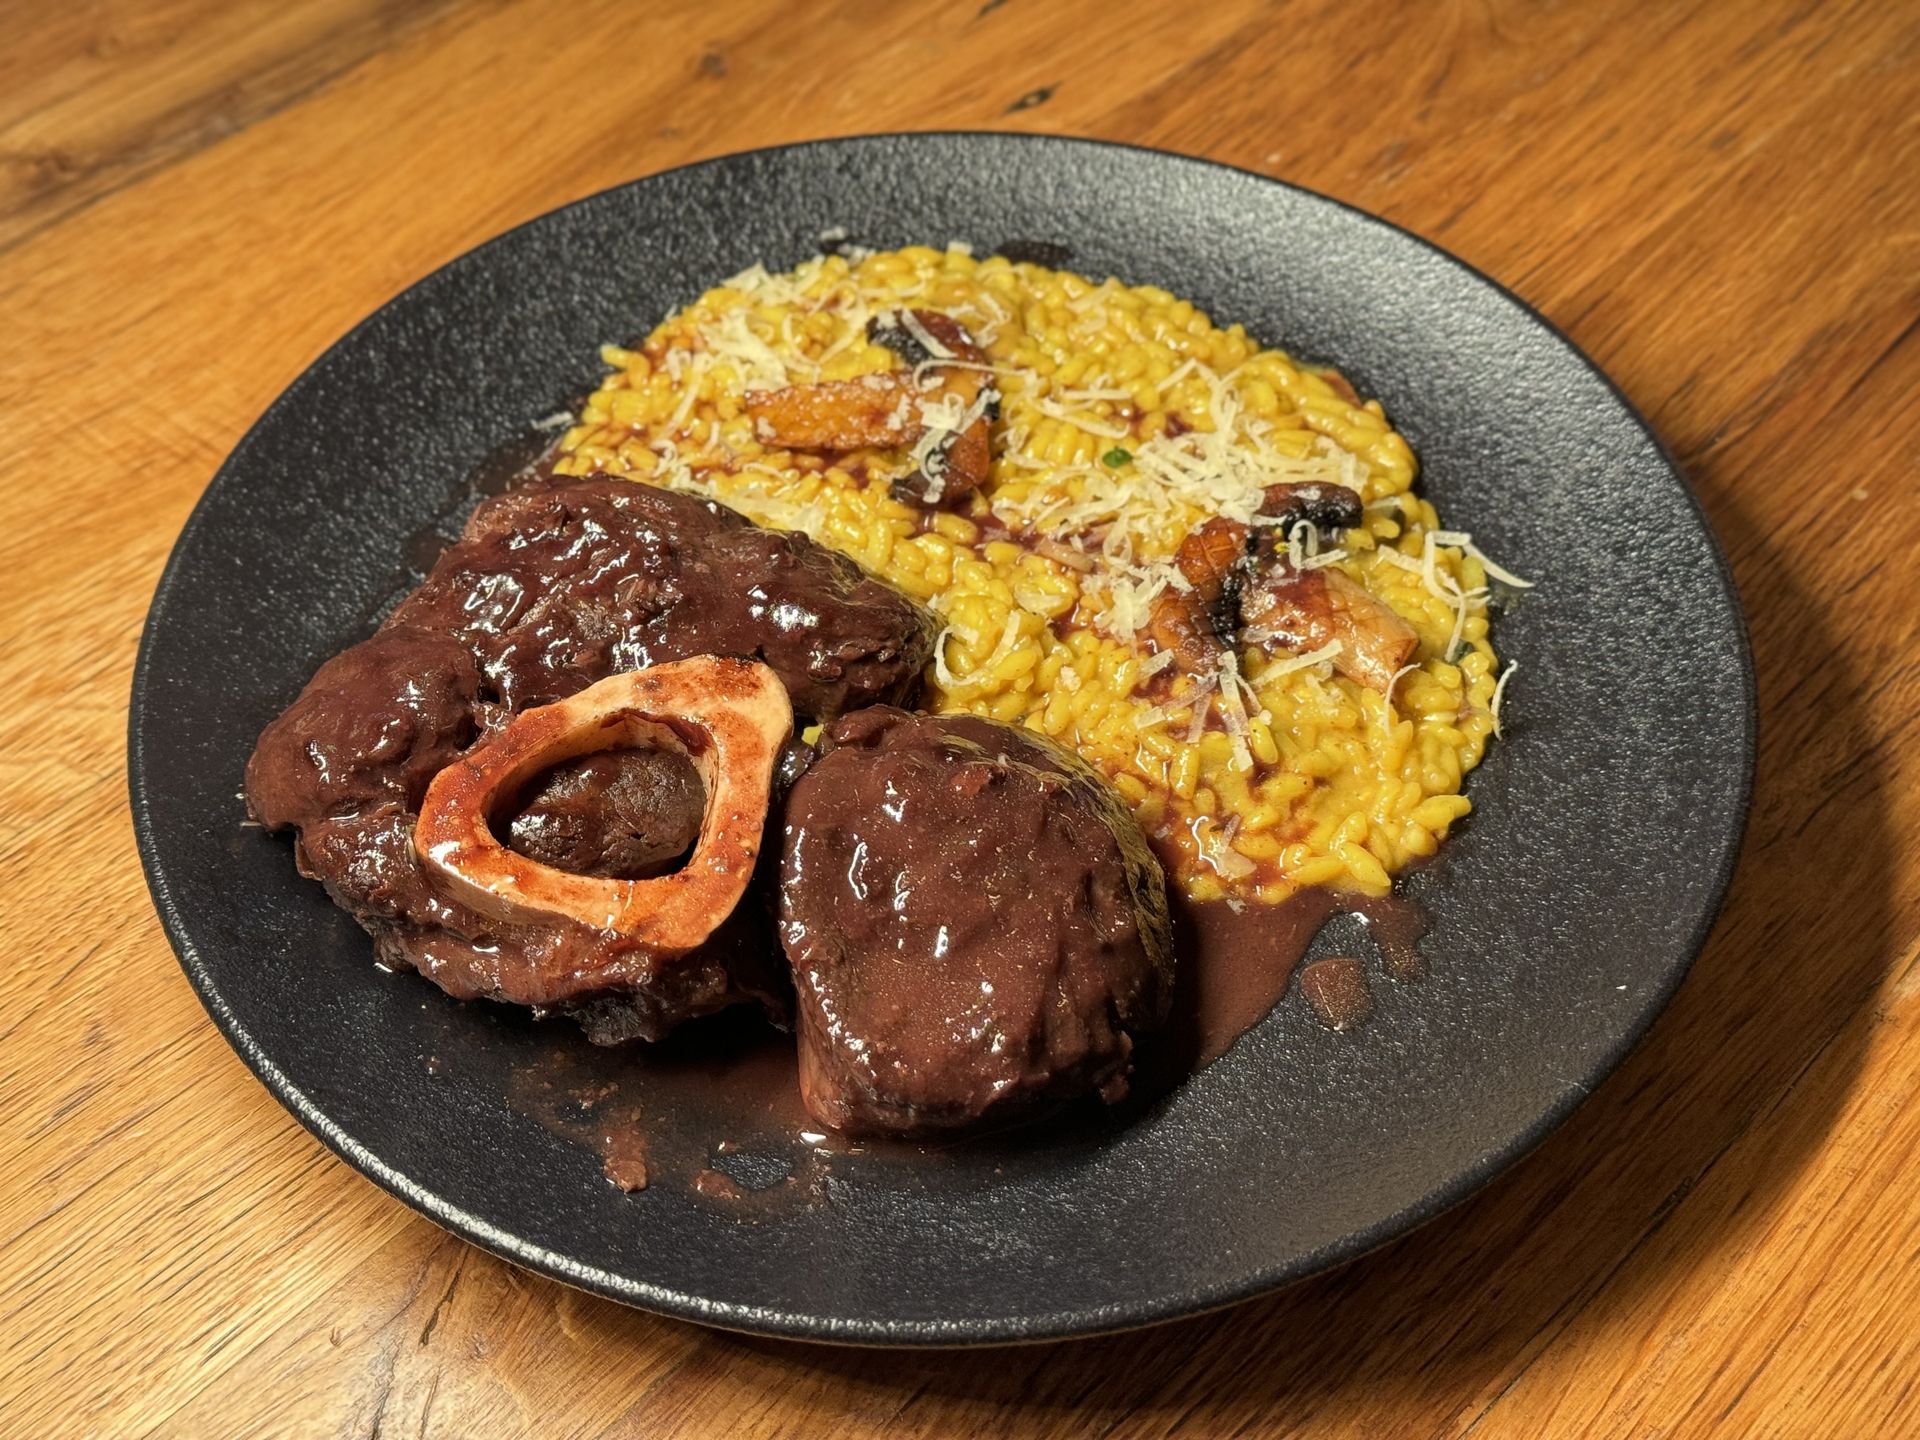 Braised veal with mushroom risotto